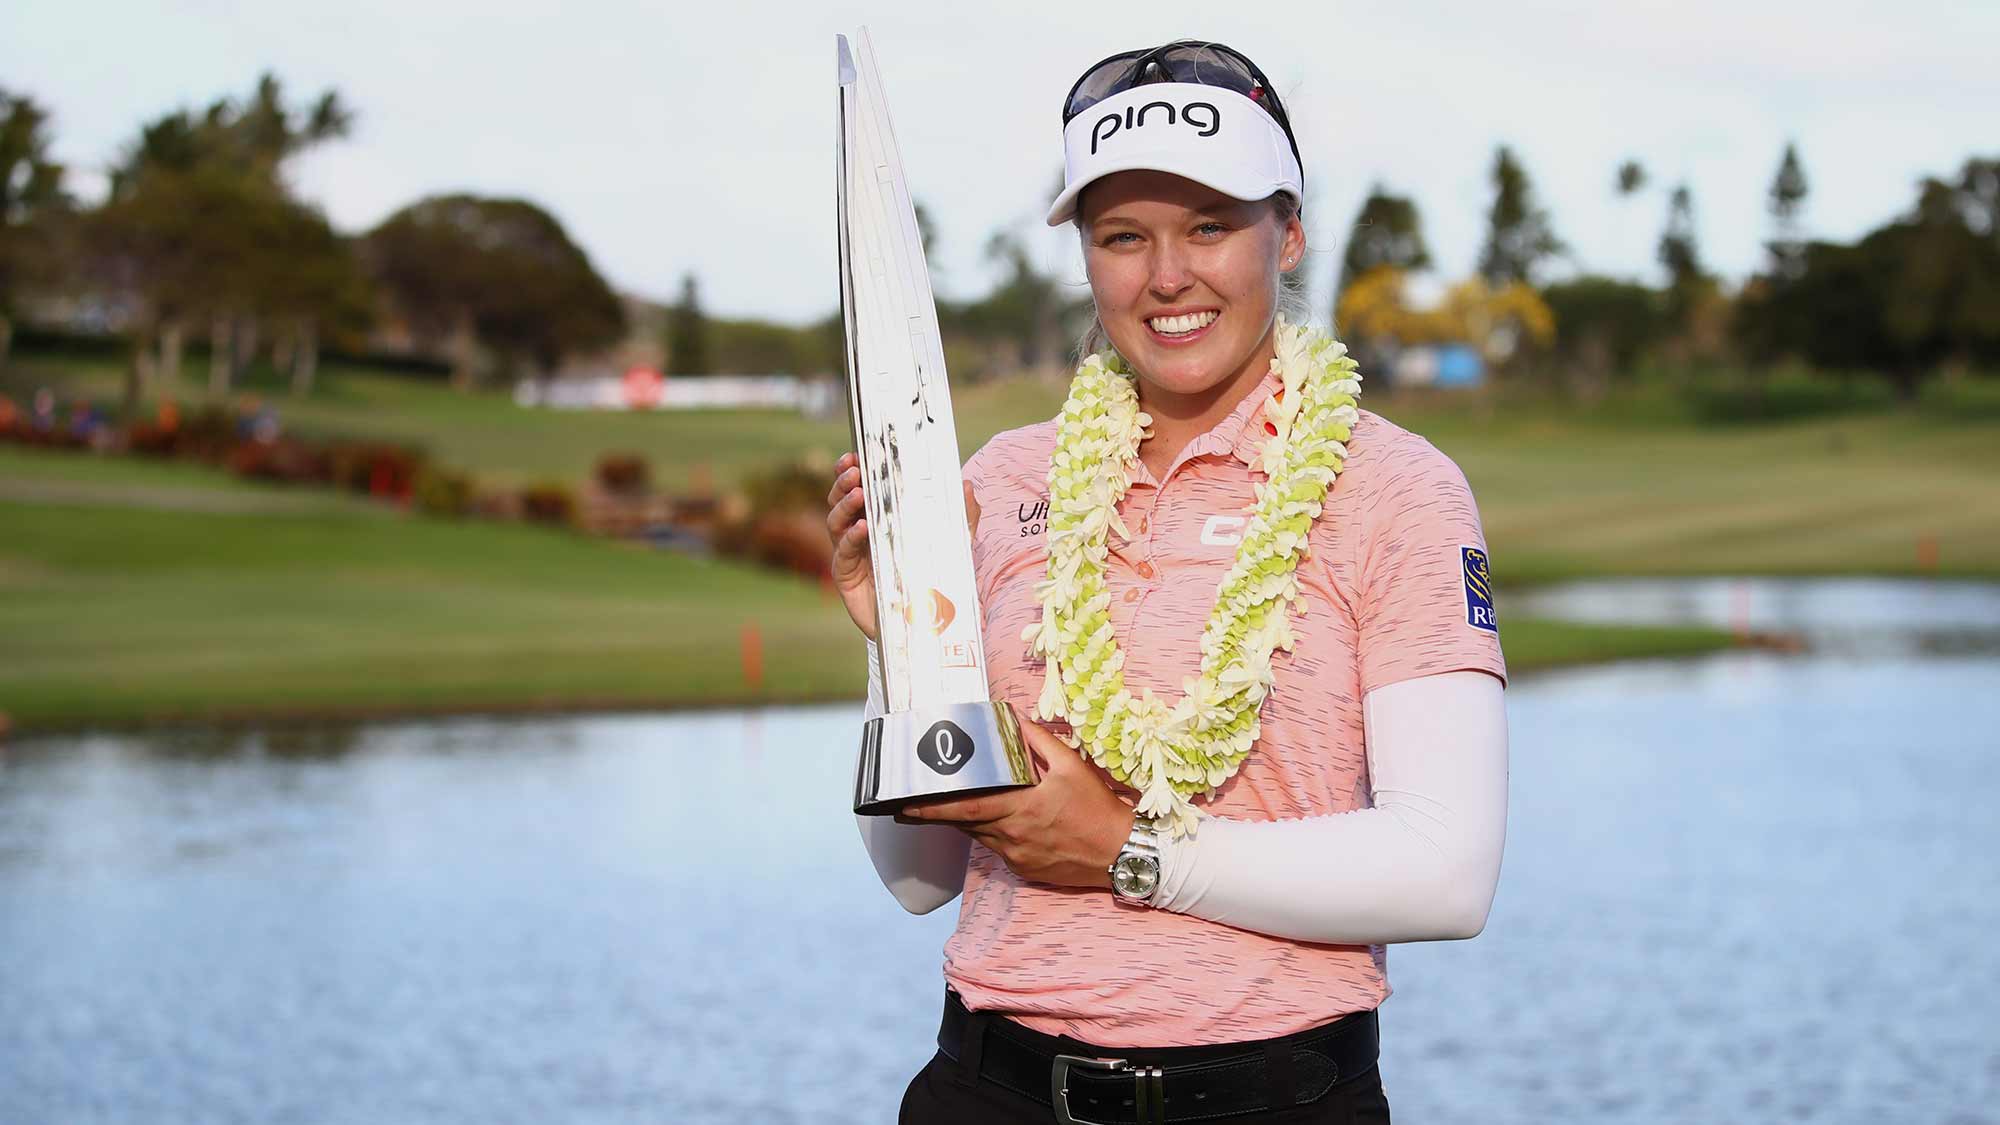 Brooke Henderson poses with the trophy after winning the LOTTE Championship at Ko Olina Golf Club on April 21, 2019 in Kapolei, Hawaii